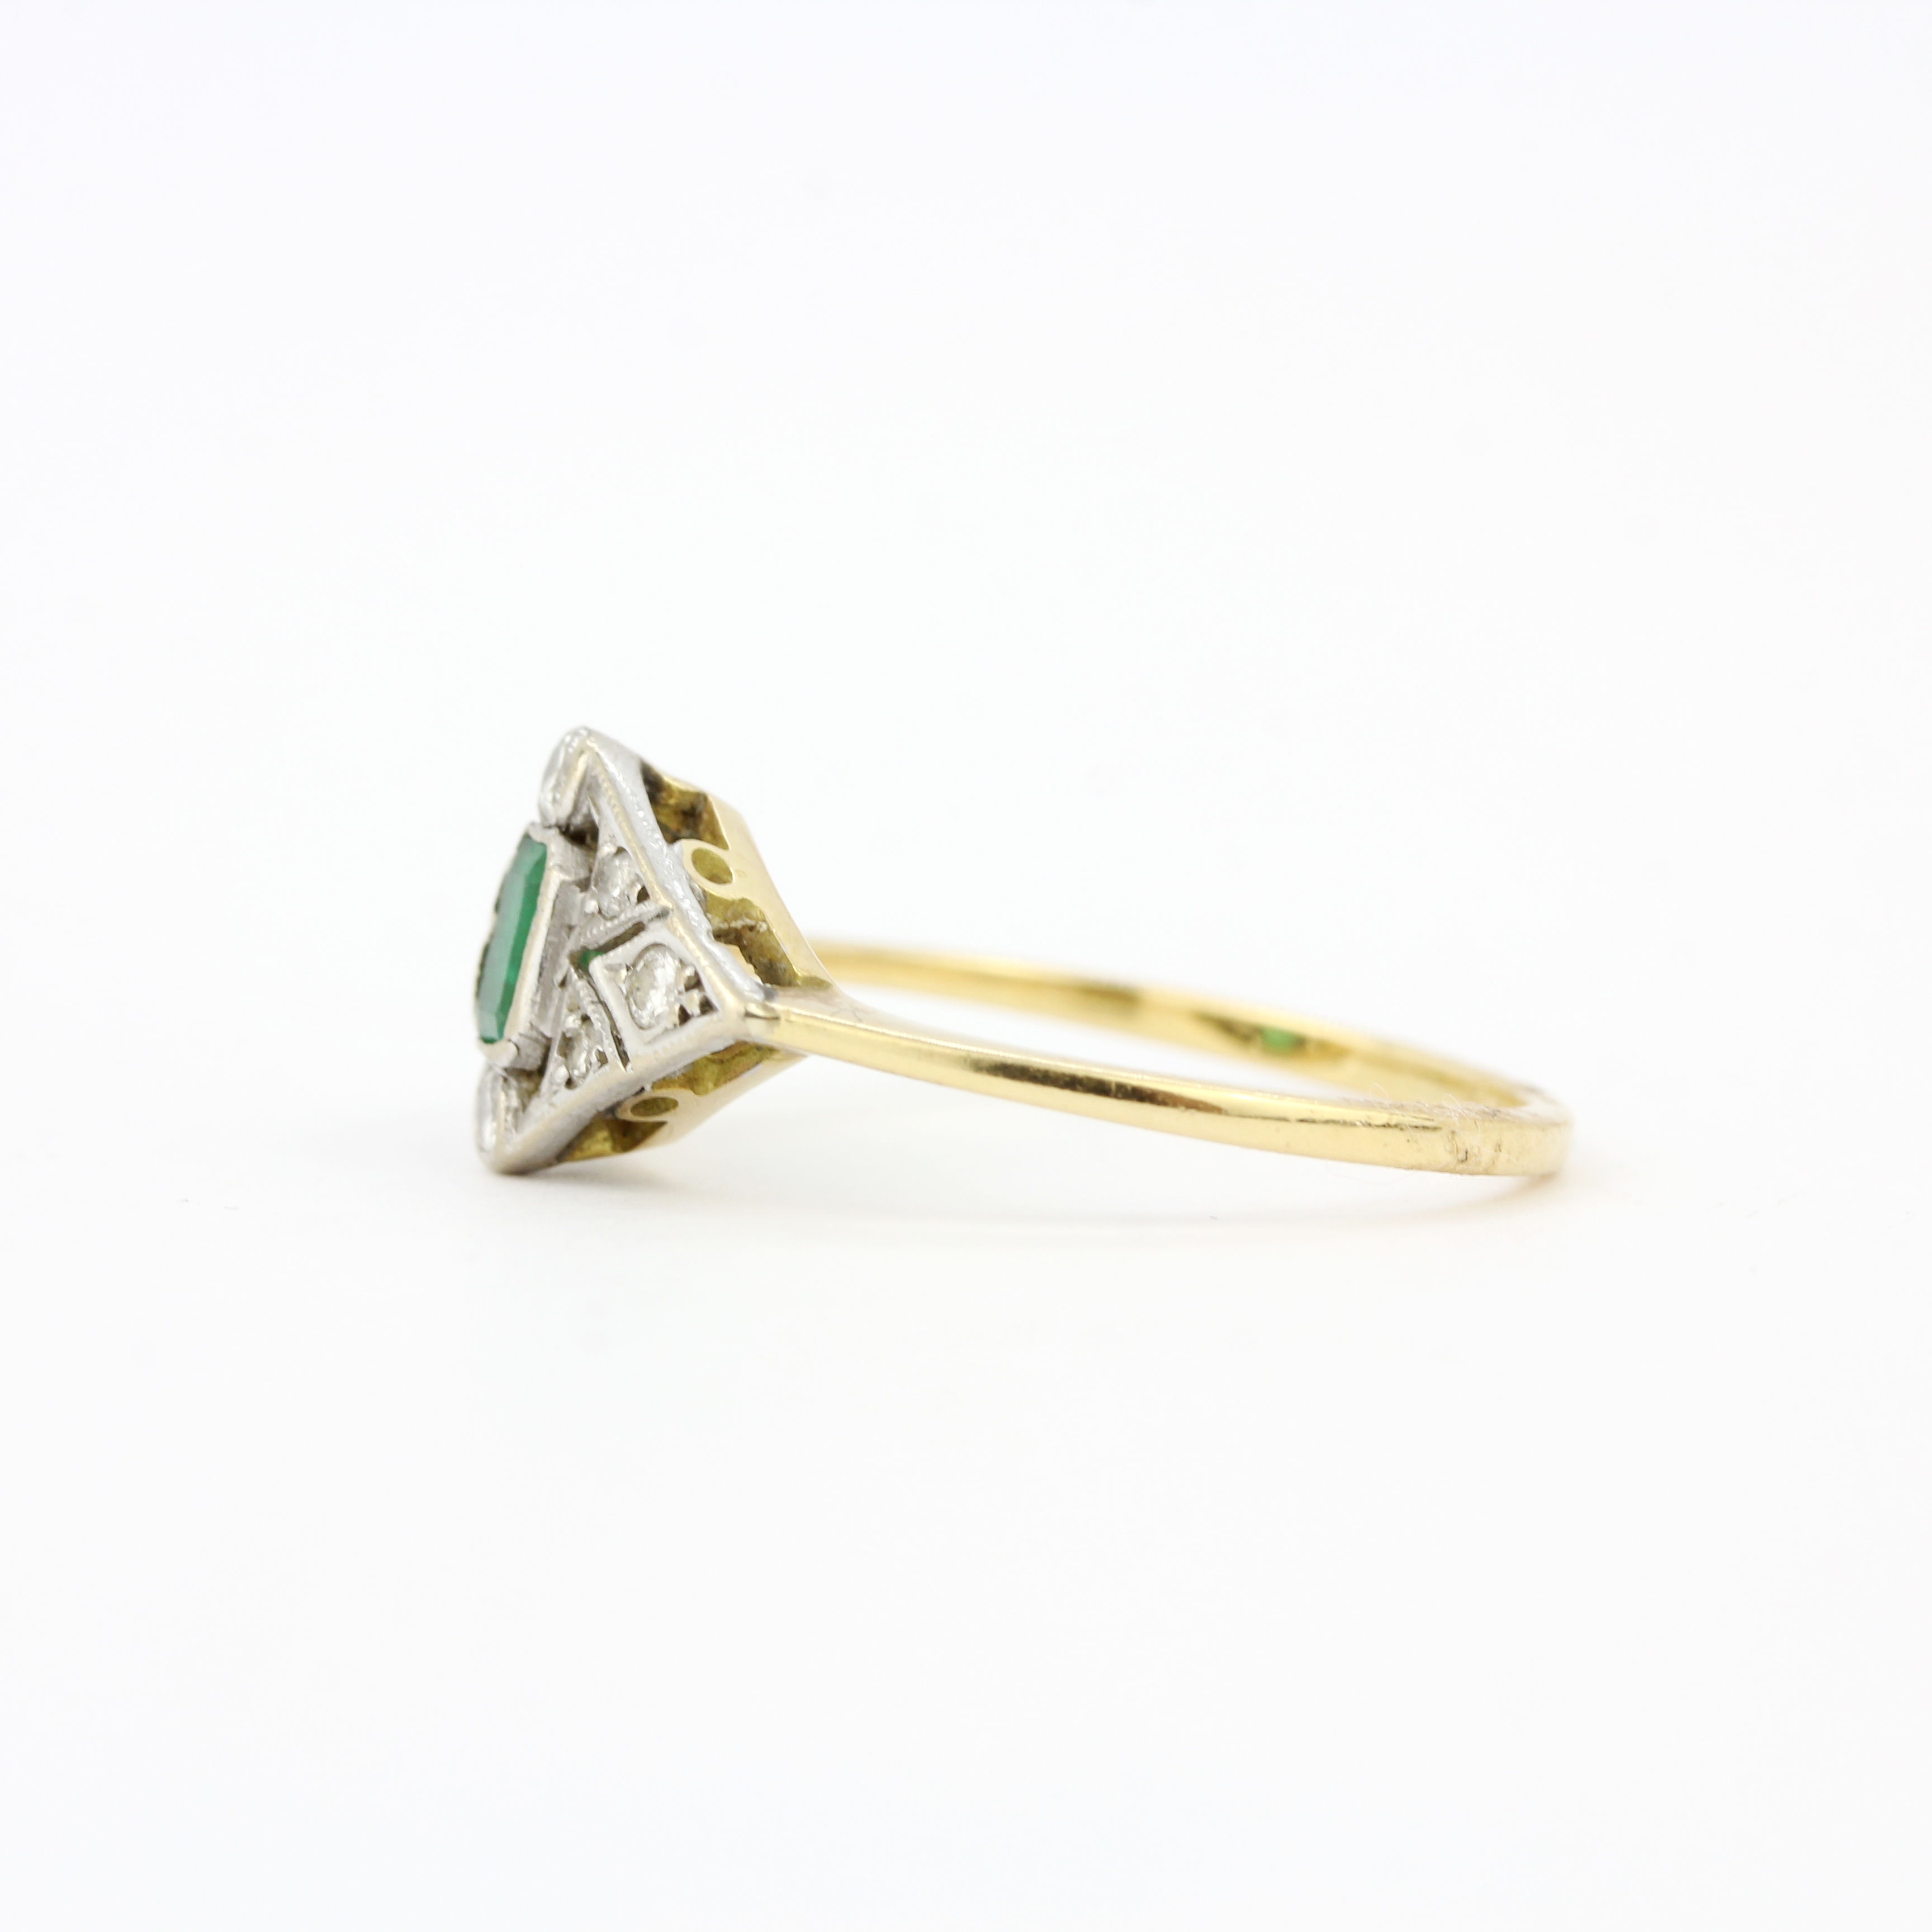 An Art Deco 18ct gold and platinum (worn hallmarks) ring set with diamonds and an emerald cut - Image 3 of 3